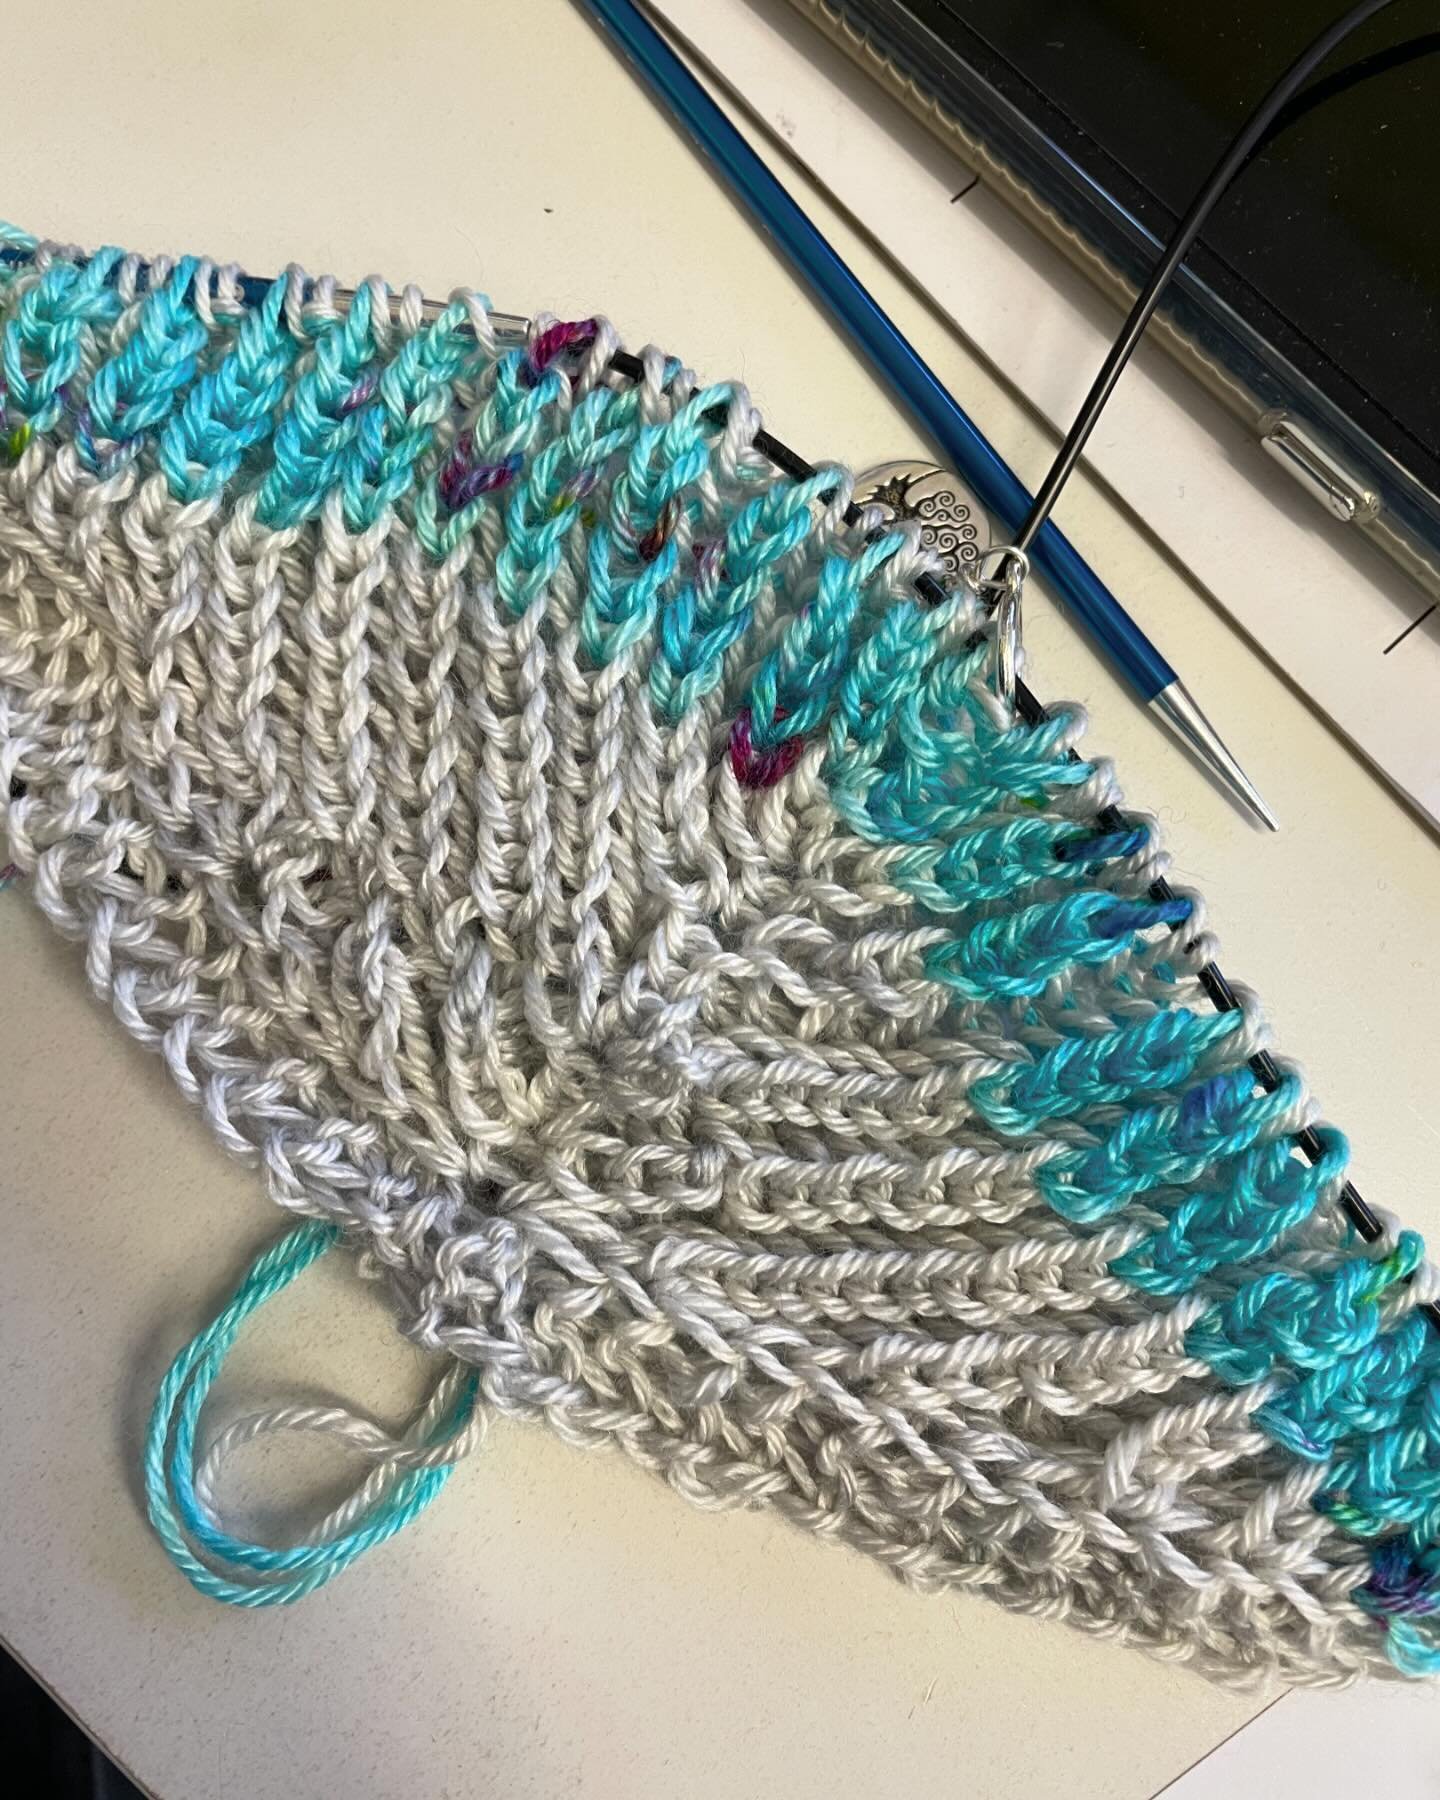 Progress on my #carillonshawl as I didn&rsquo;t cast on (last week 🥴) when I wanted to but today. I&rsquo;m using Aurora and Monteleone White on Luxe, which is admittedly a lighter weight than the pattern calls for (this is fingering and the pattern